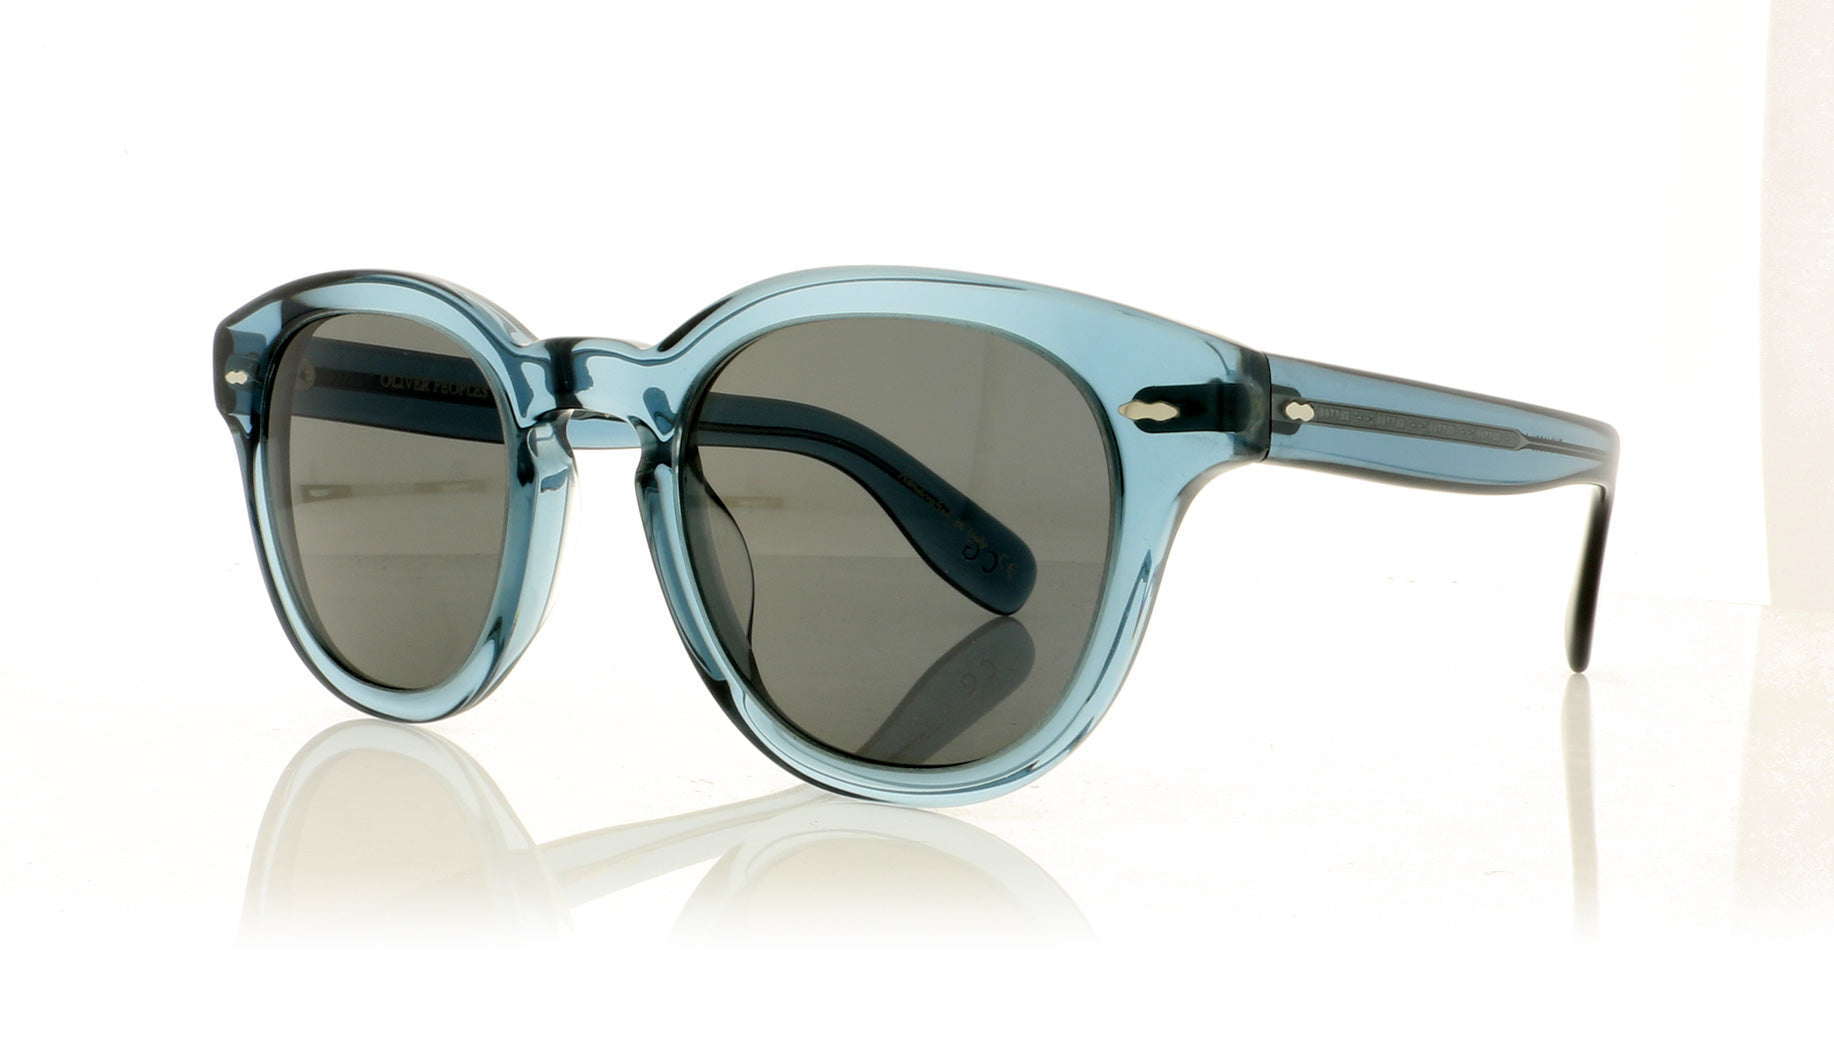 Oliver Peoples Cary Grant Sun 1617R5 Washed Teal Sunglasses | OCO